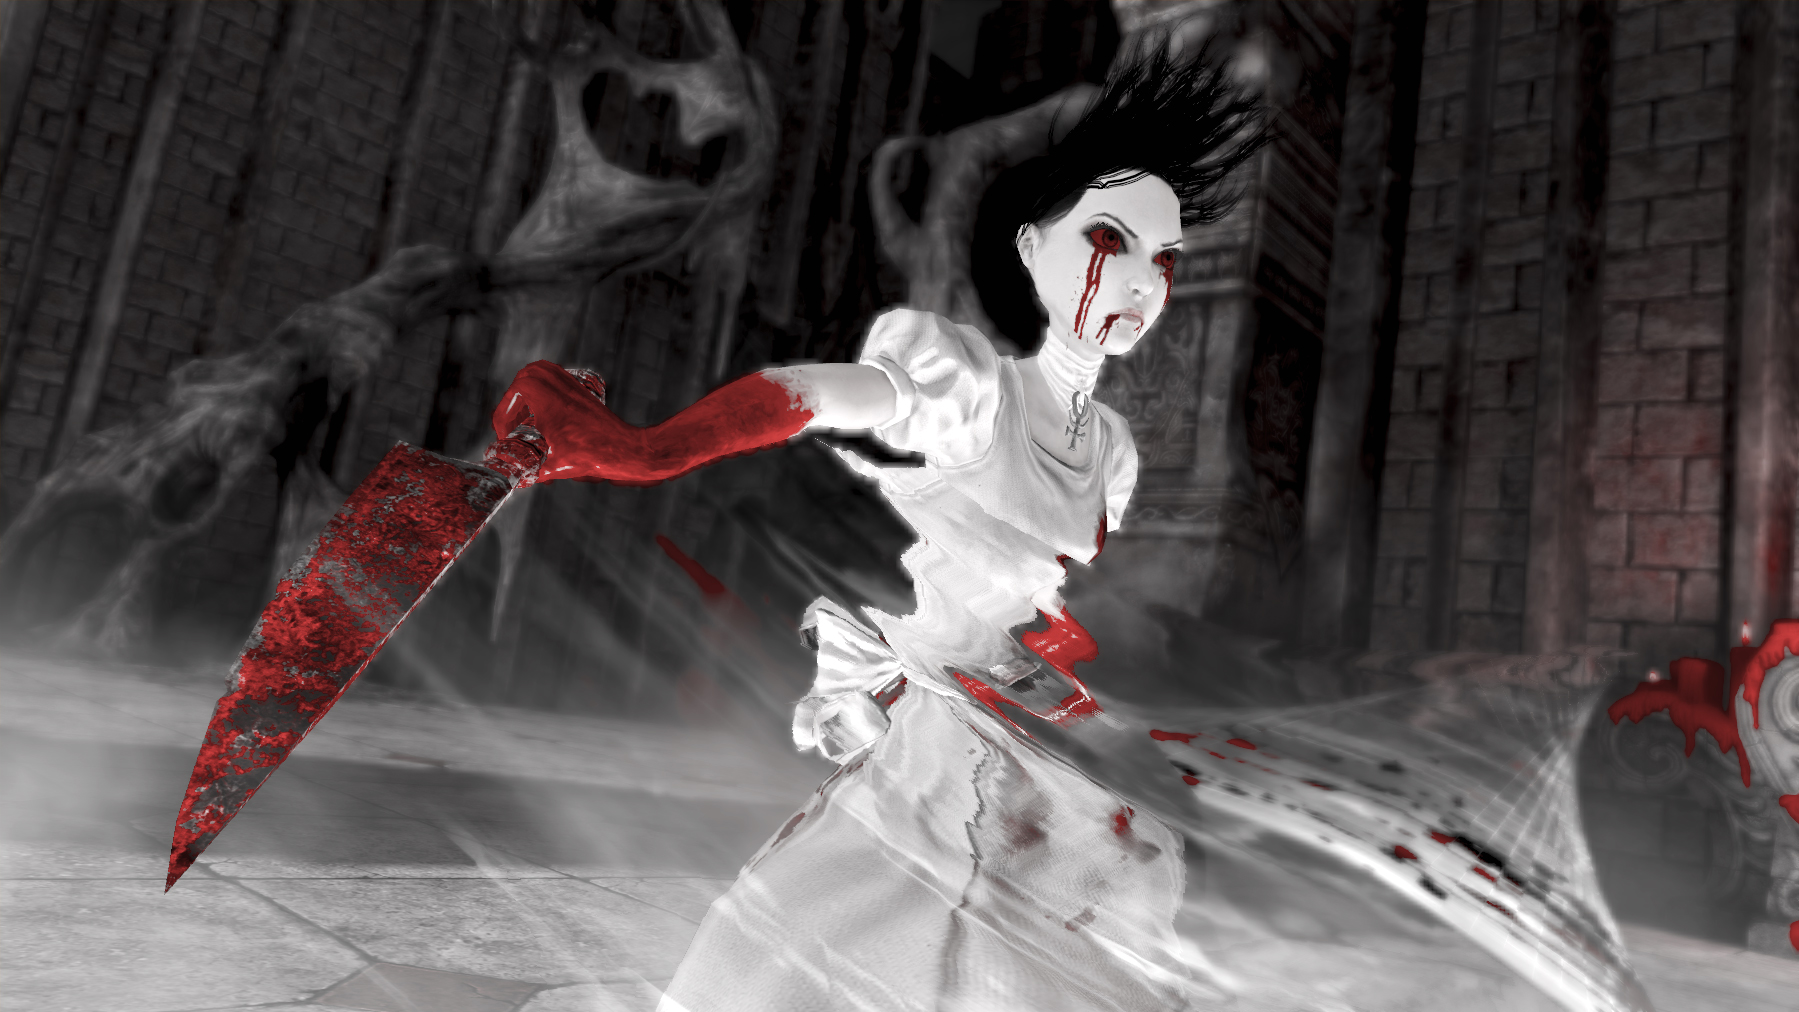 Screenshot for the game Alice: Madness Returns (2011) RS | Repack by R.G. The mechanics